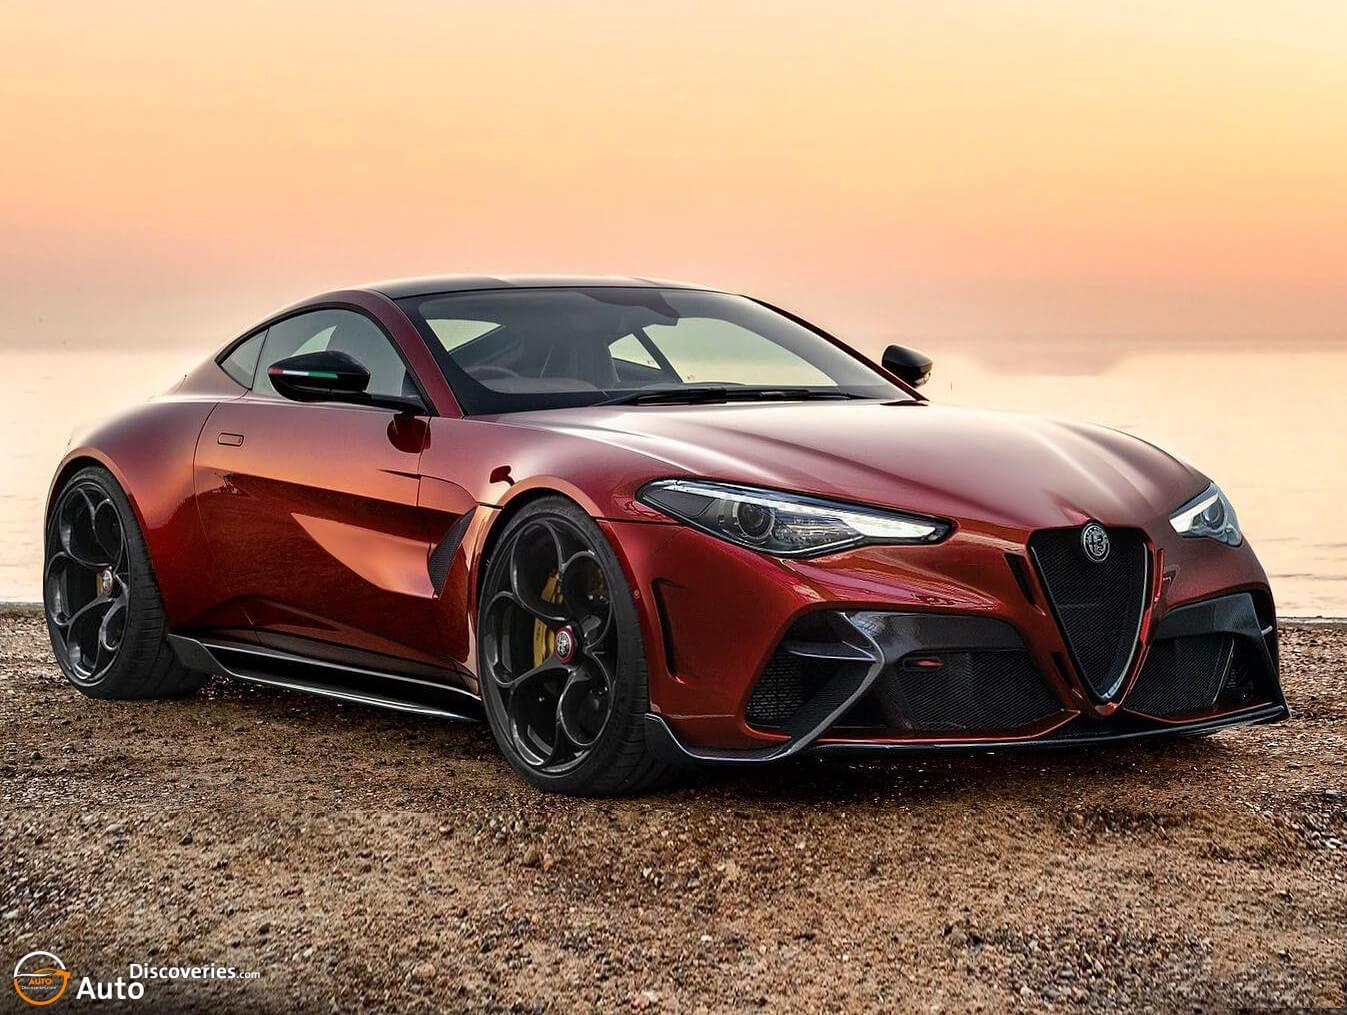 new-alfa-romeo-6c-will-it-see-the-light-of-day-auto-discoveries